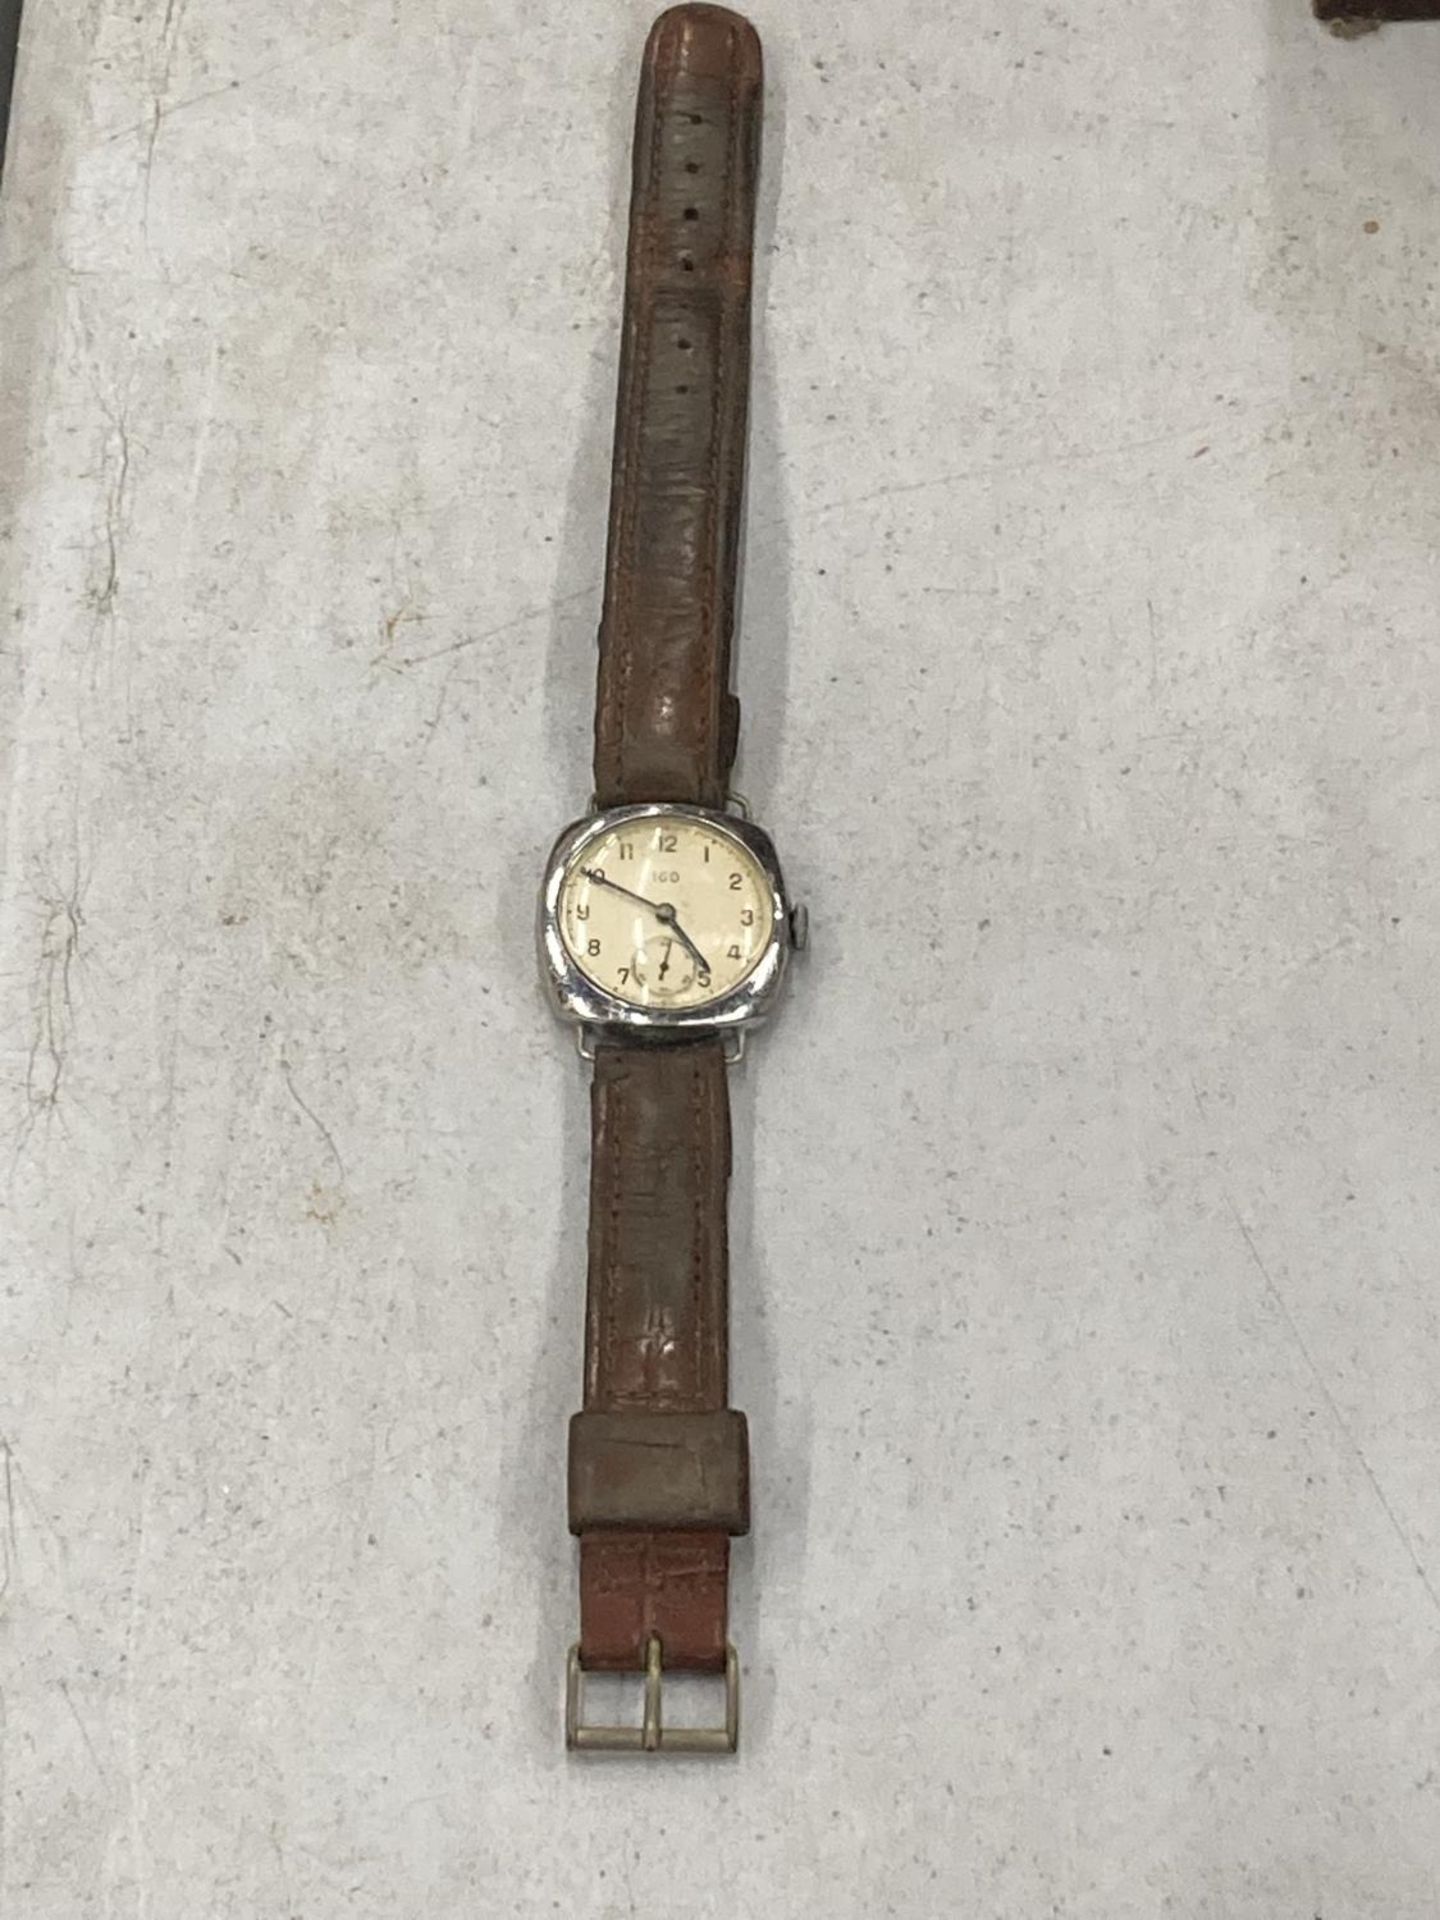 A VINTAGE TRENCH WATCH (NOT WORKING)